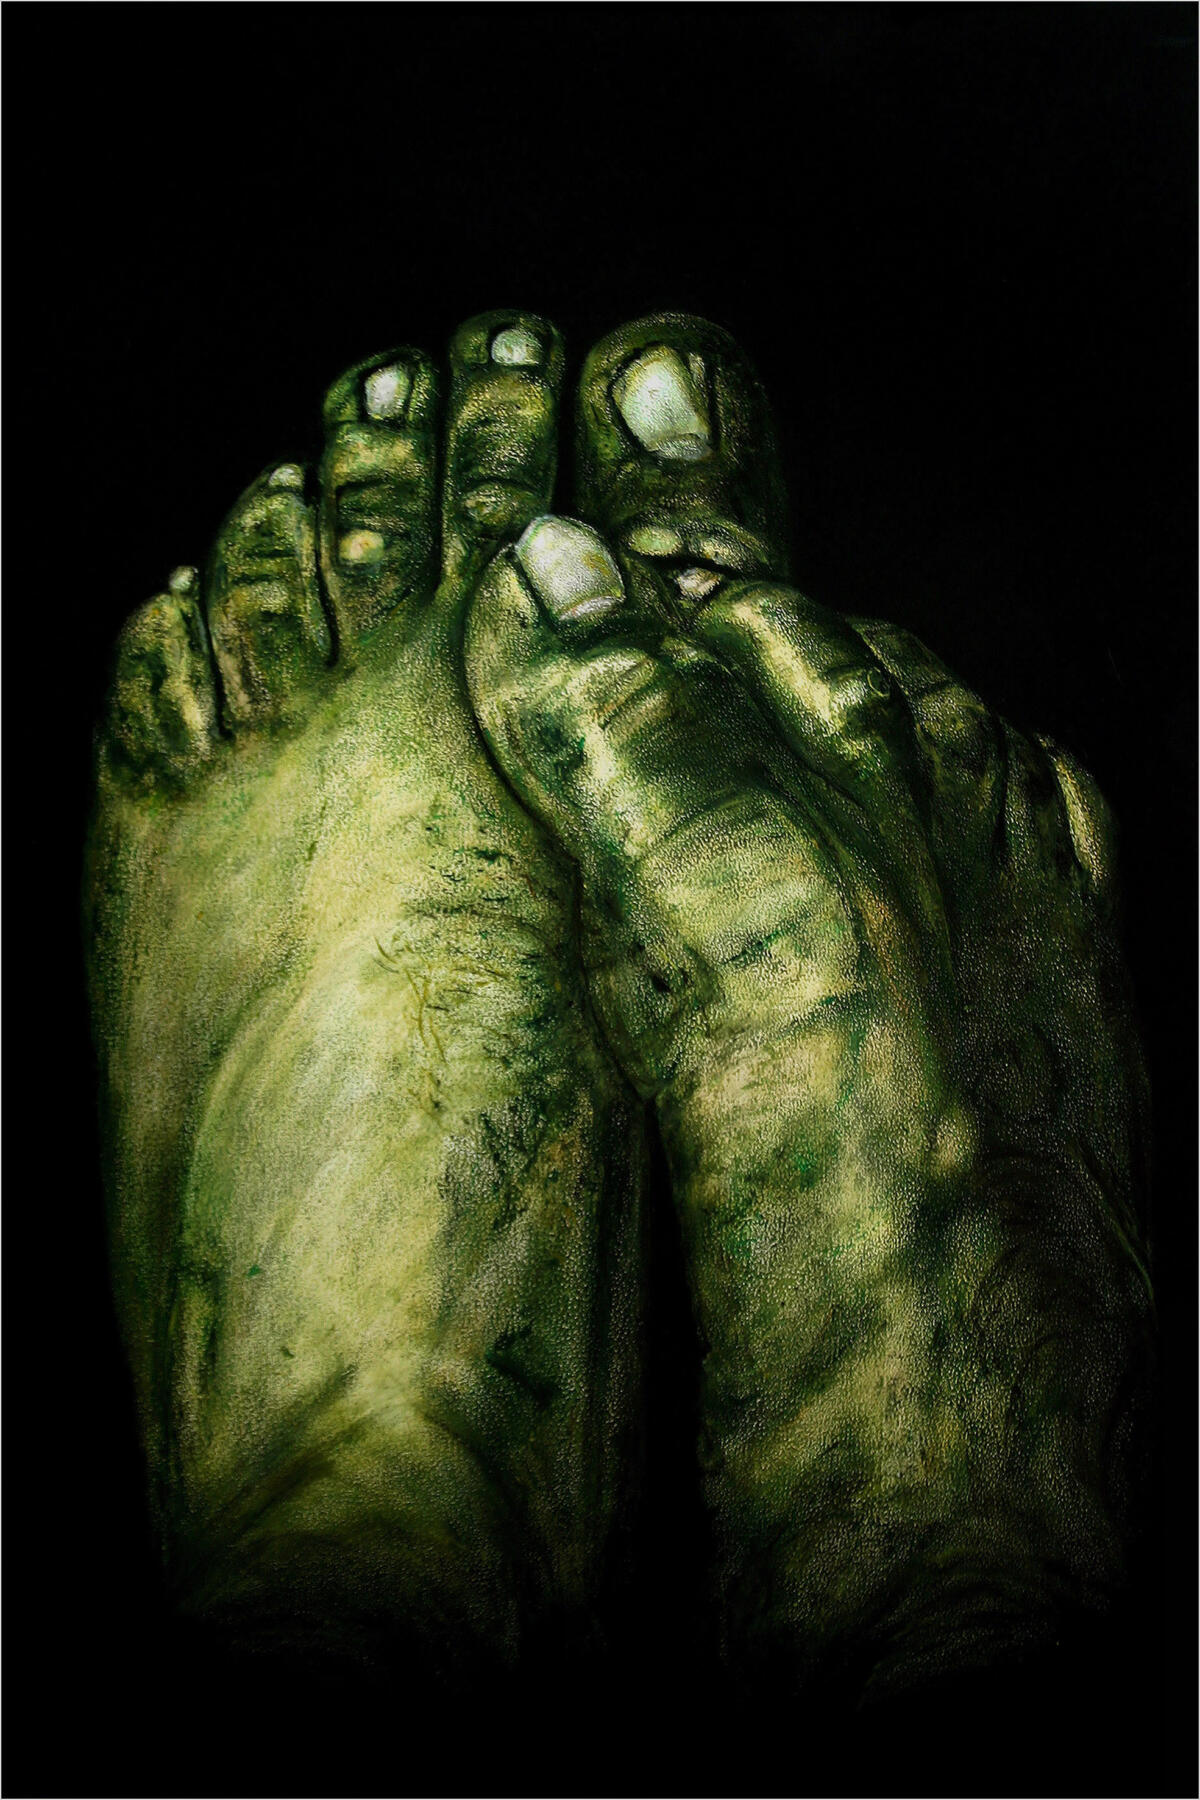 See "Pieds" of Cyrille Legros